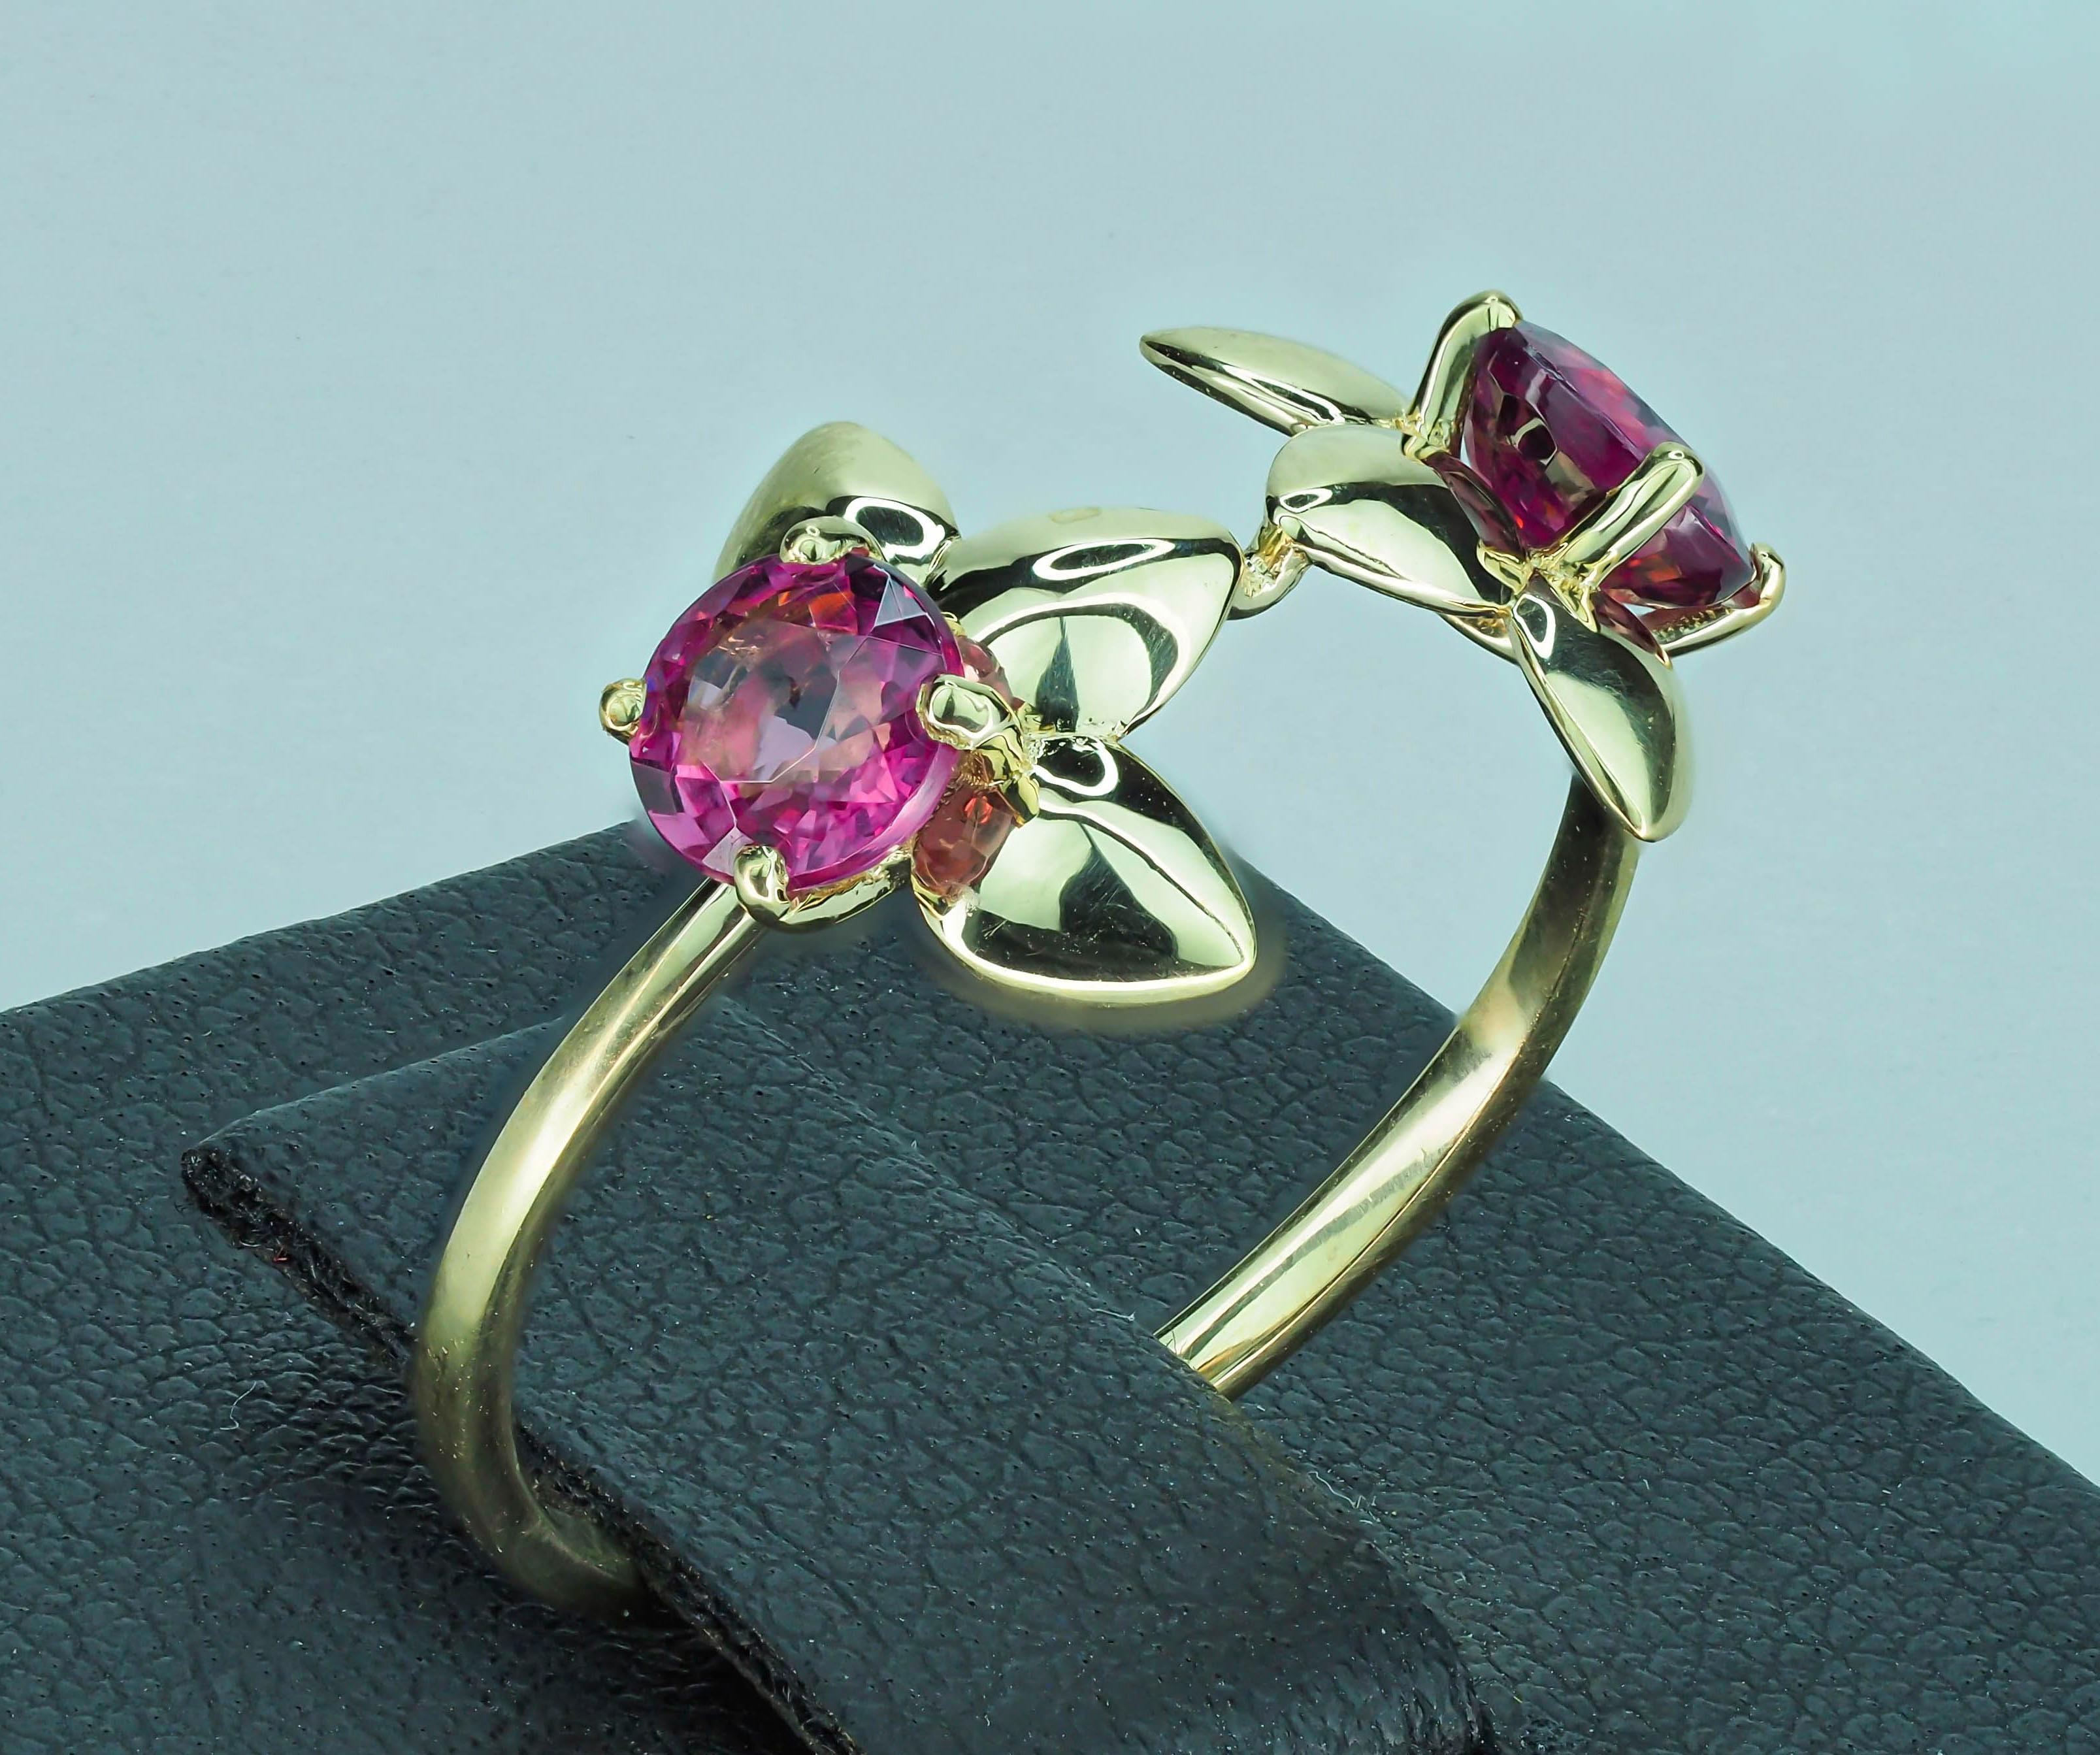 For Sale:  Two garnets 14k gold ring 4